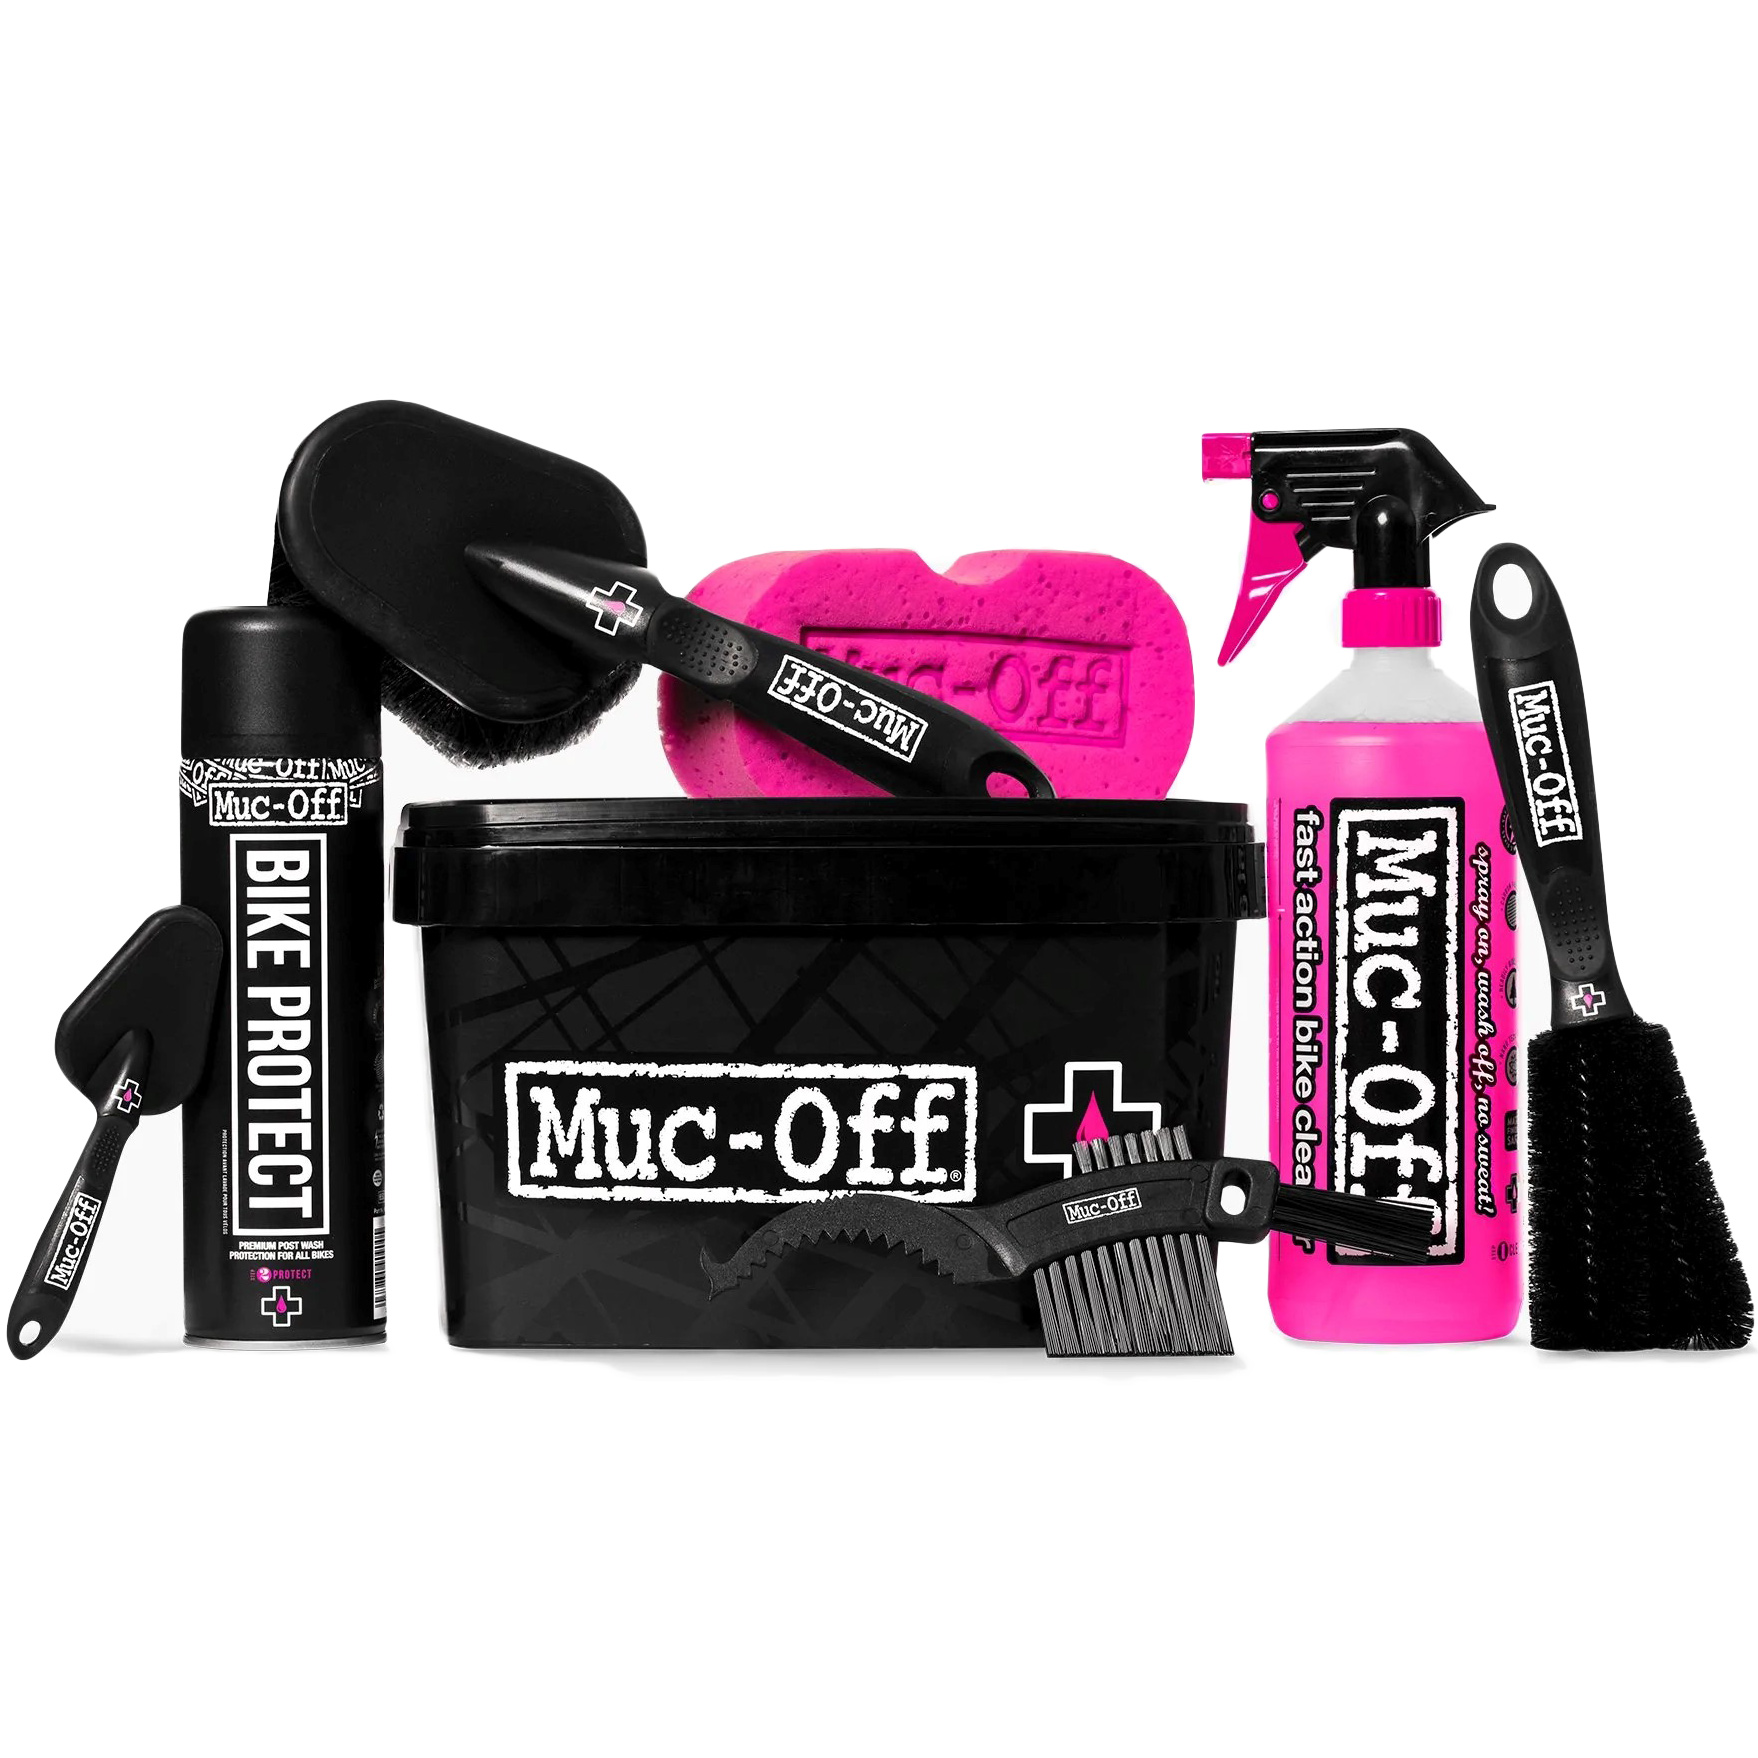 Productfoto van Muc-Off 8 in 1 Bicycle Cleaning Kit